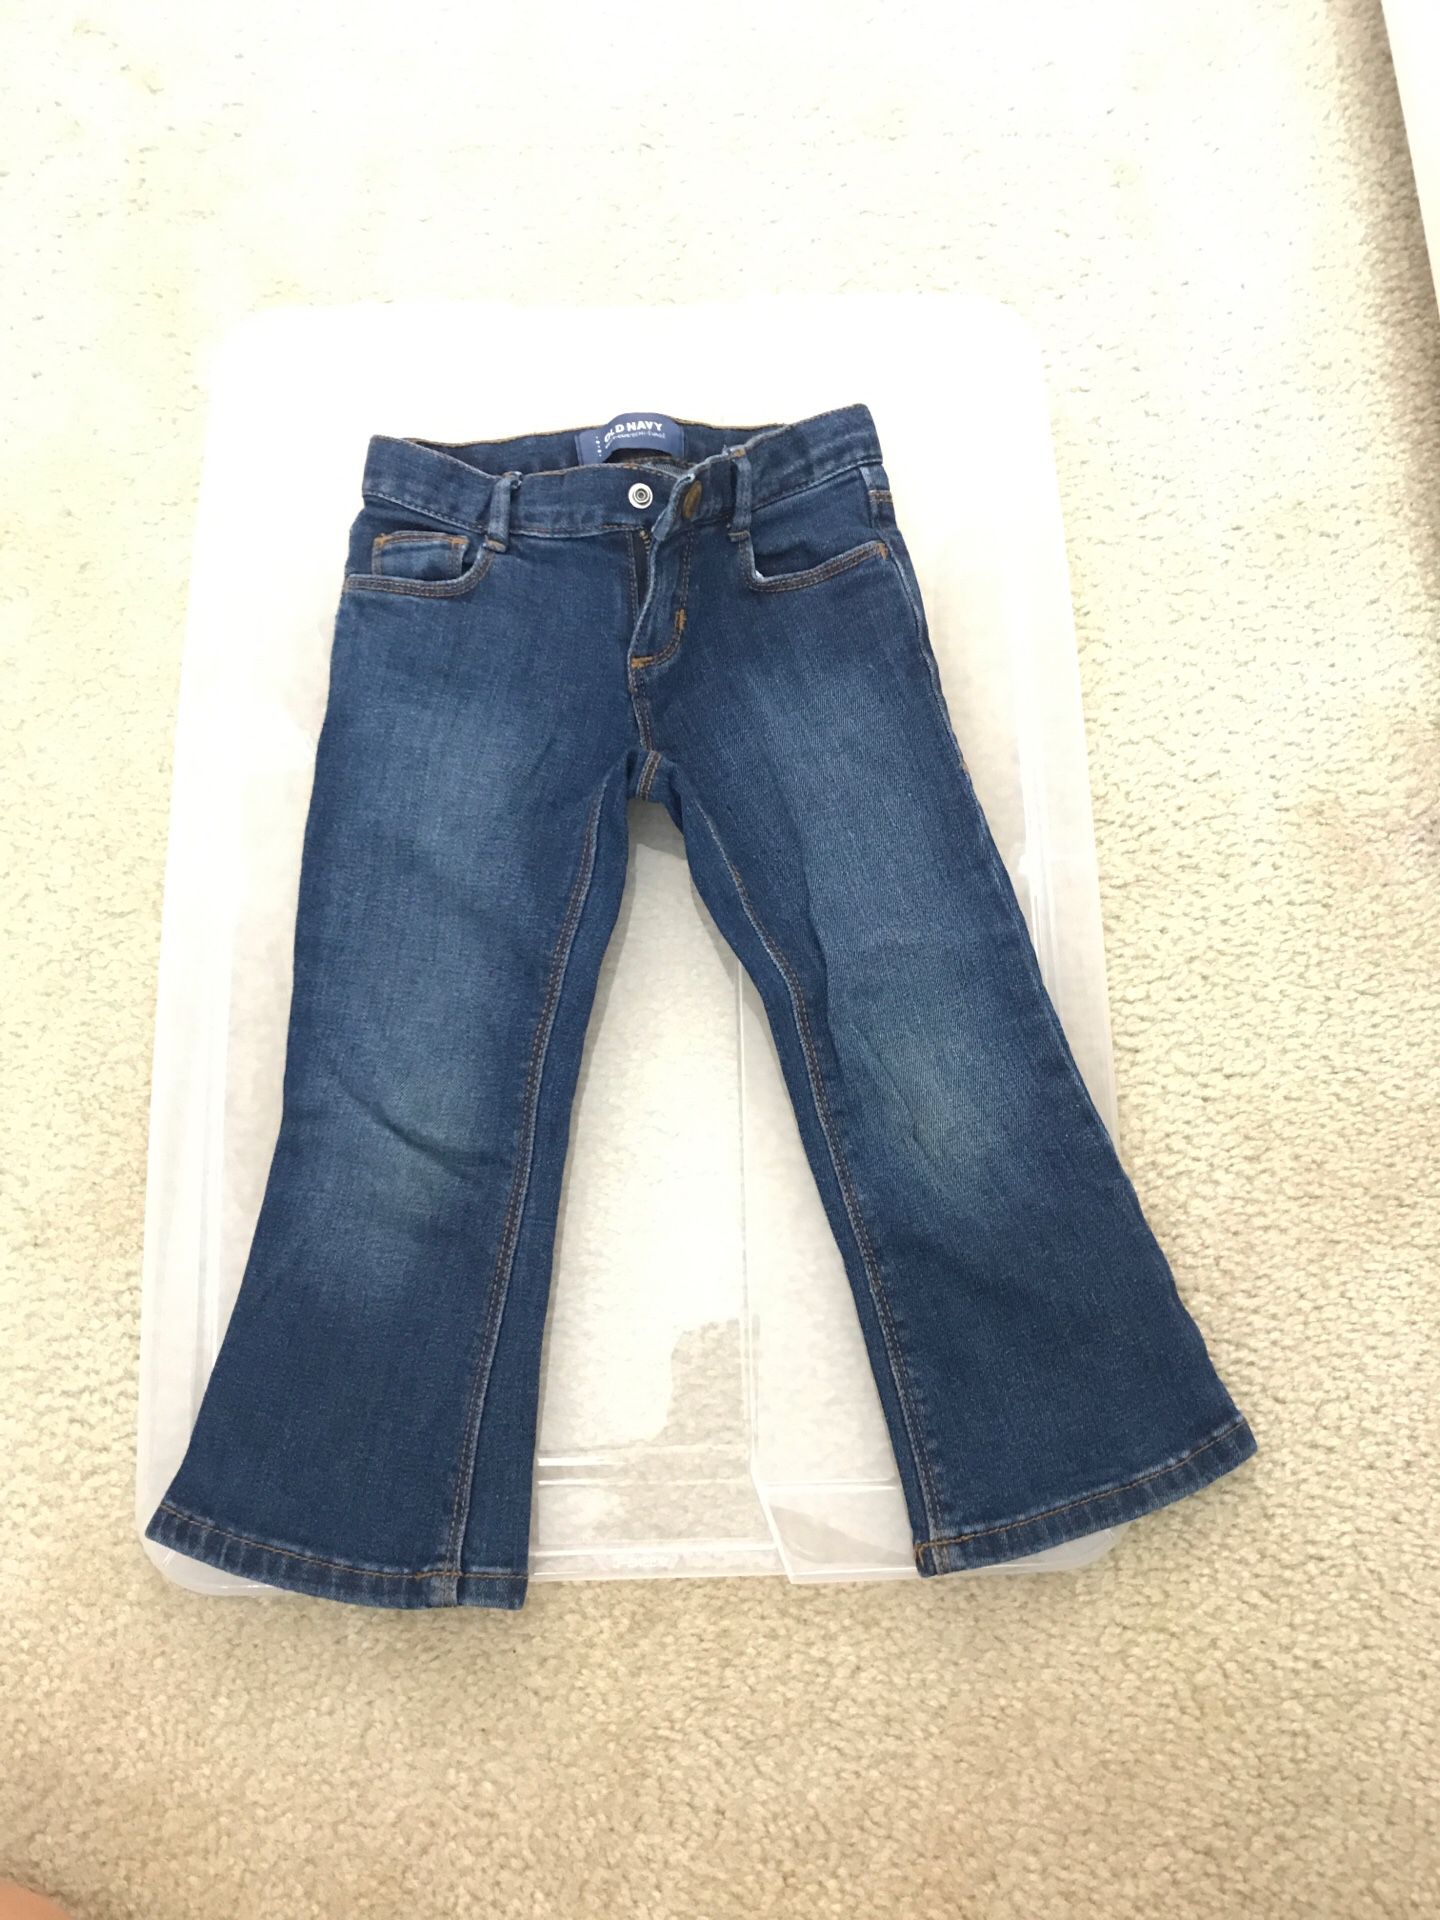 Old navy girls jeans